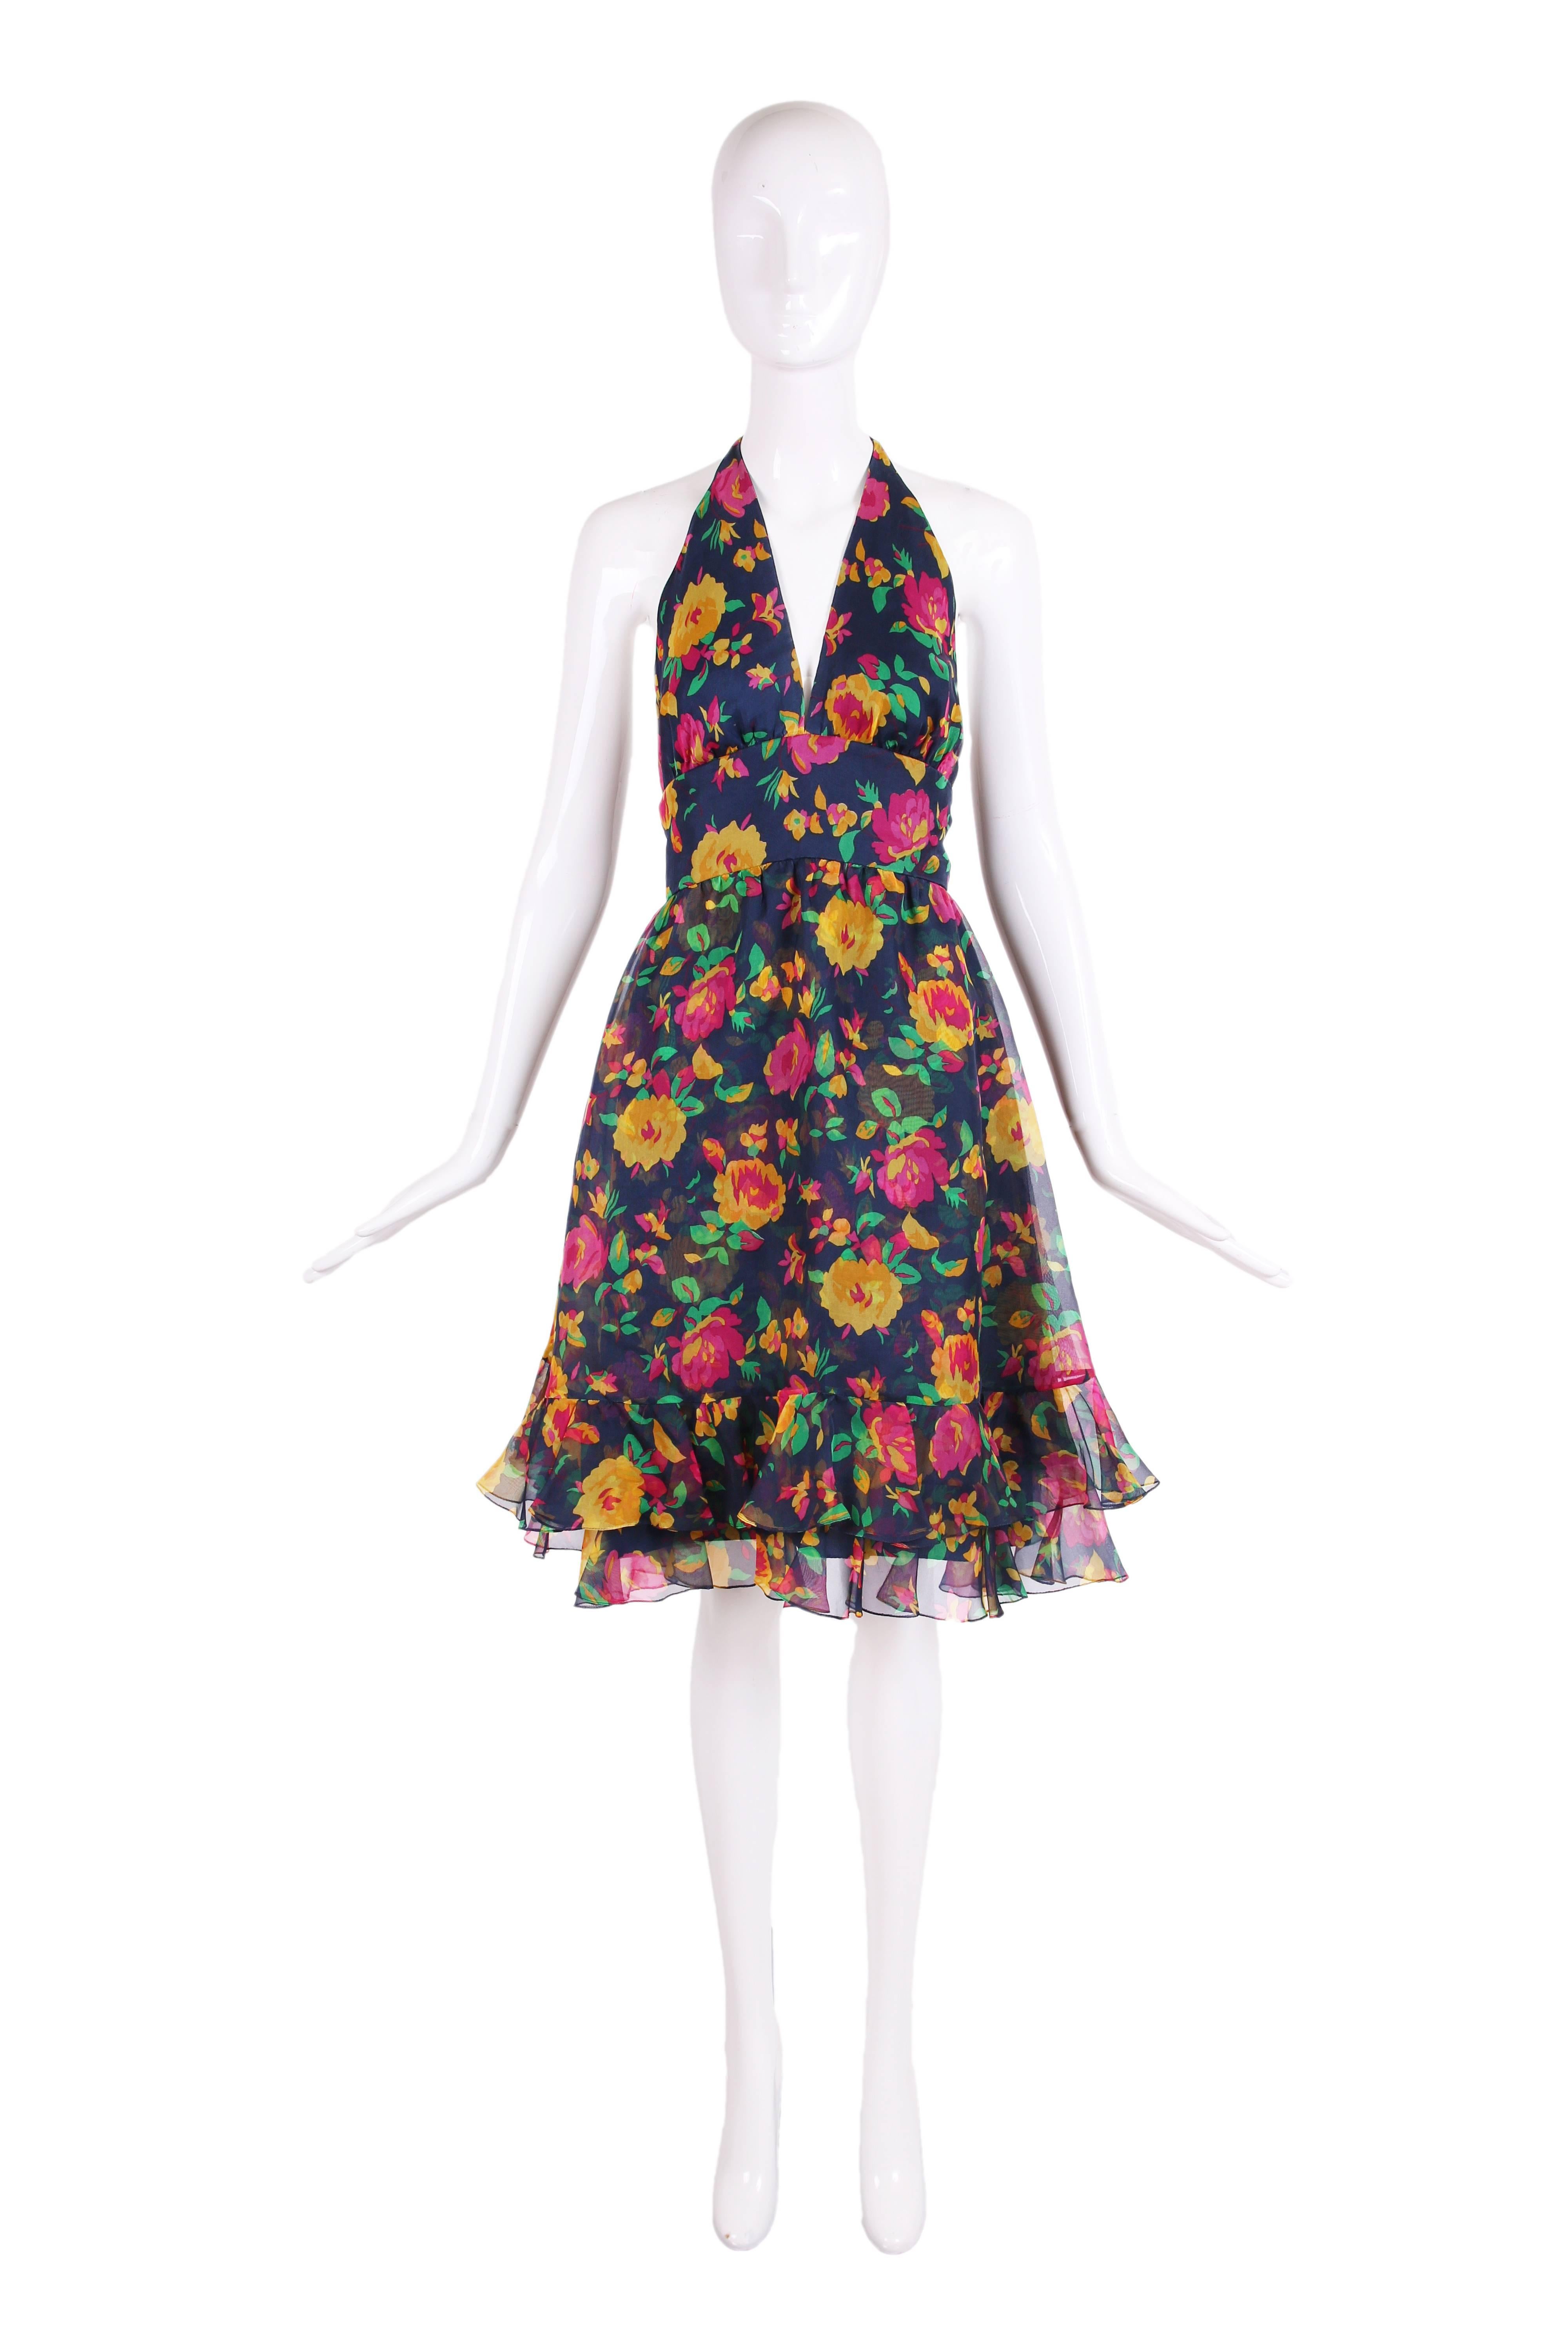 1970's Oscar de la Renta purple/pink, mustard and green floral printed multi-layered organza halter dress on a background of dark blue and ruffled hem. Lined at the interior, ties at back neck, hidden zipper at center back. Dress is in very good